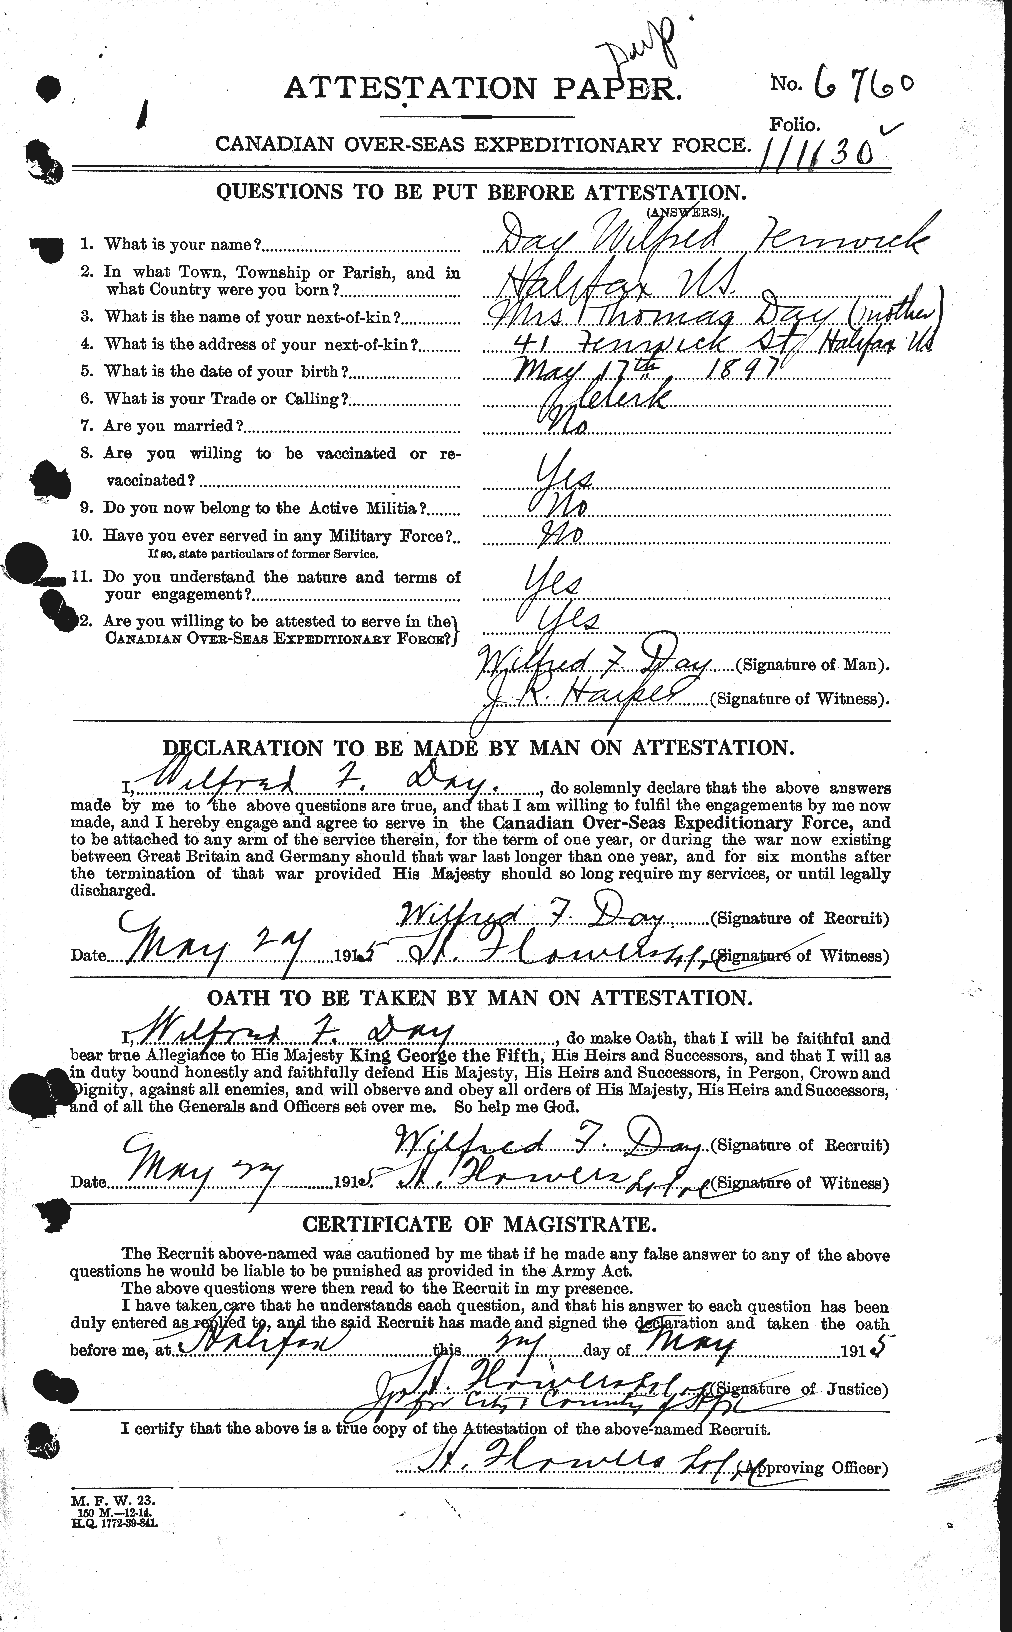 Personnel Records of the First World War - CEF 283518a